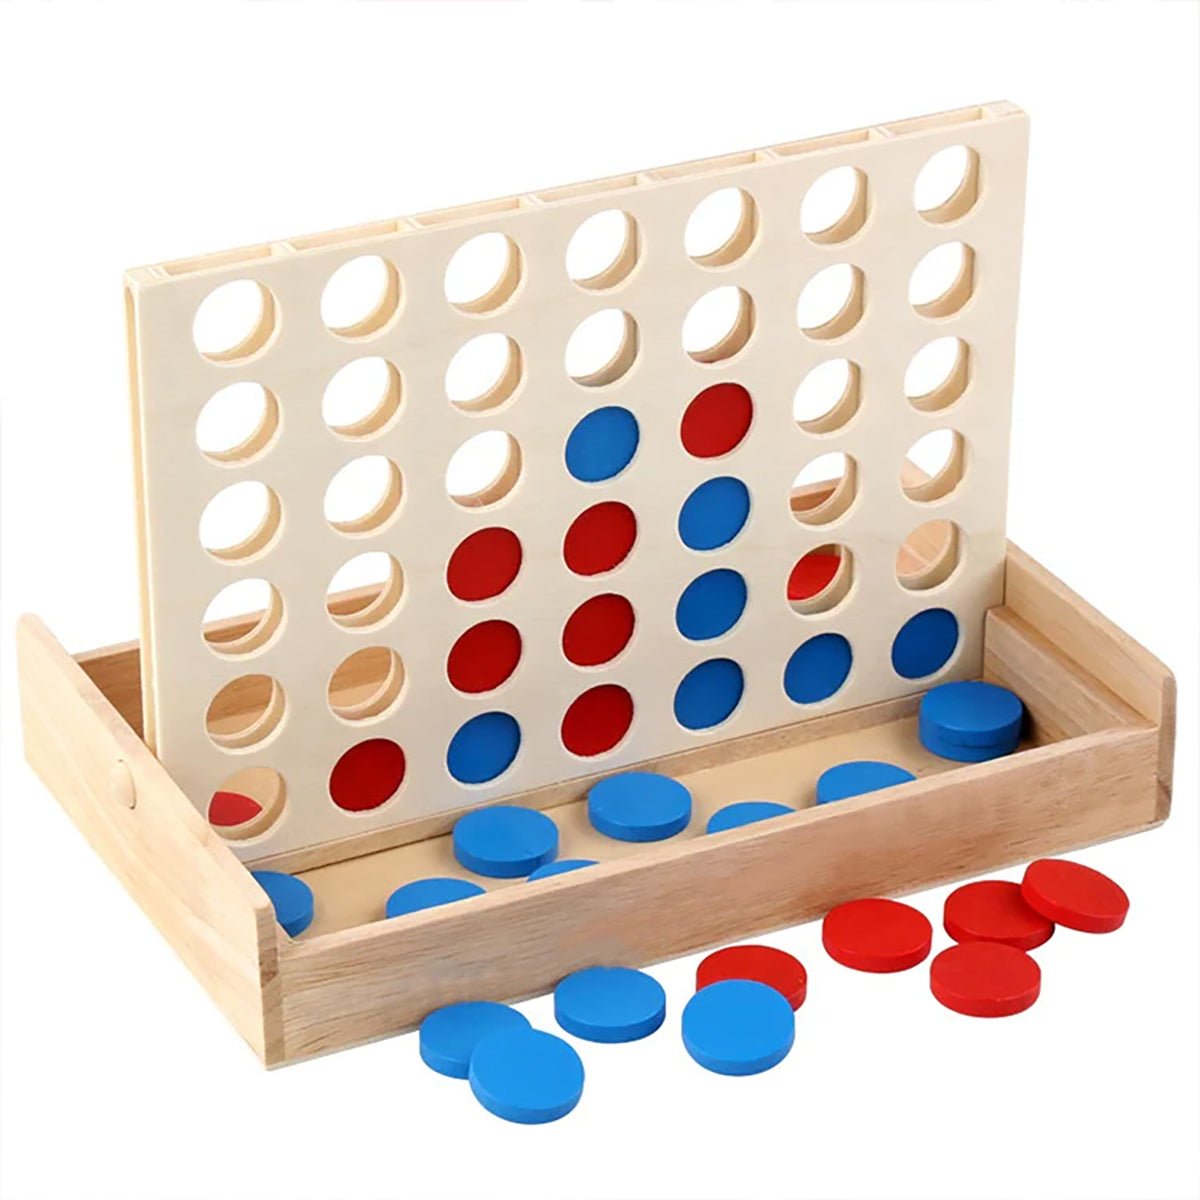 Wooden Connect 4 | Lucas Loves Cars